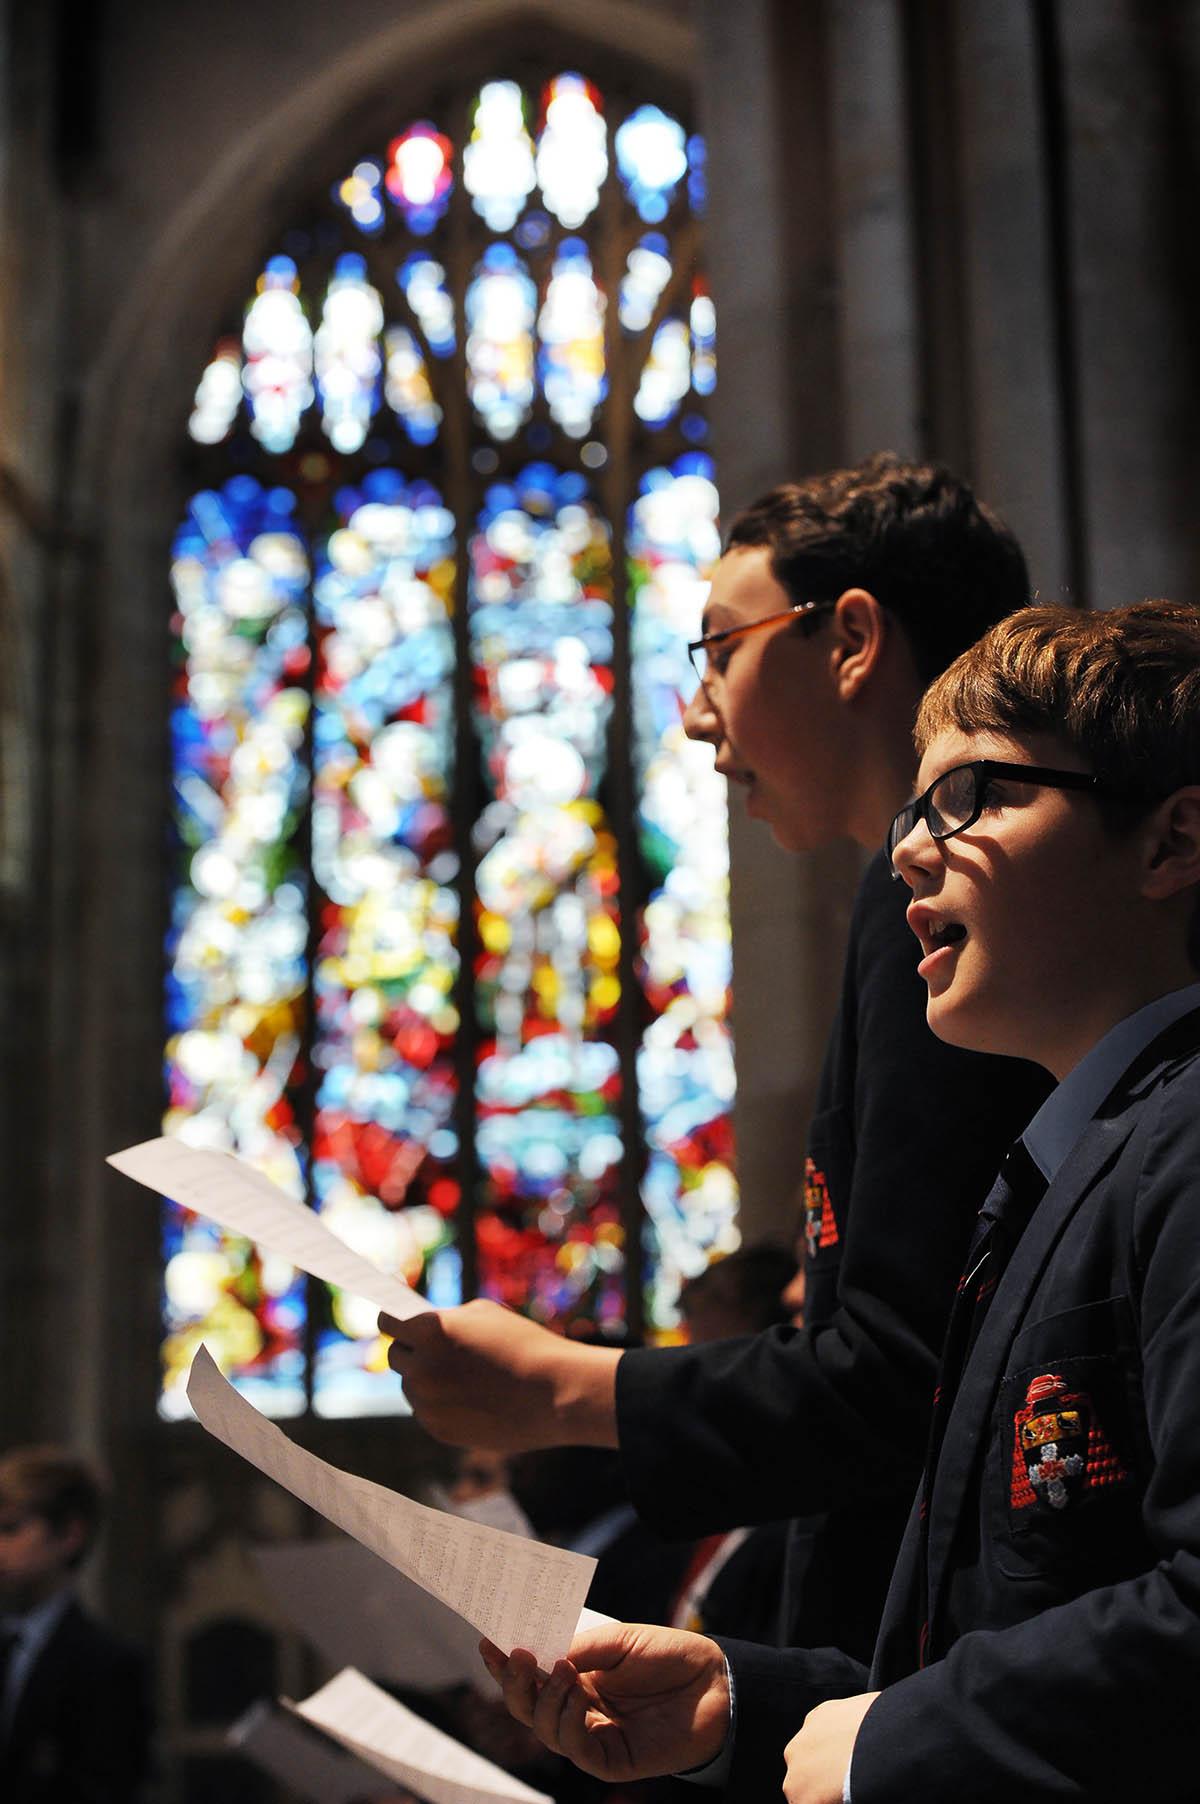 Pictures for around Oxfordshire of the Somme 100th Anniversary Commemorations  Christ Church Cathedral School held a special service to commemorate the Battle of the Somme, 
PIC BY JON LEWIS.